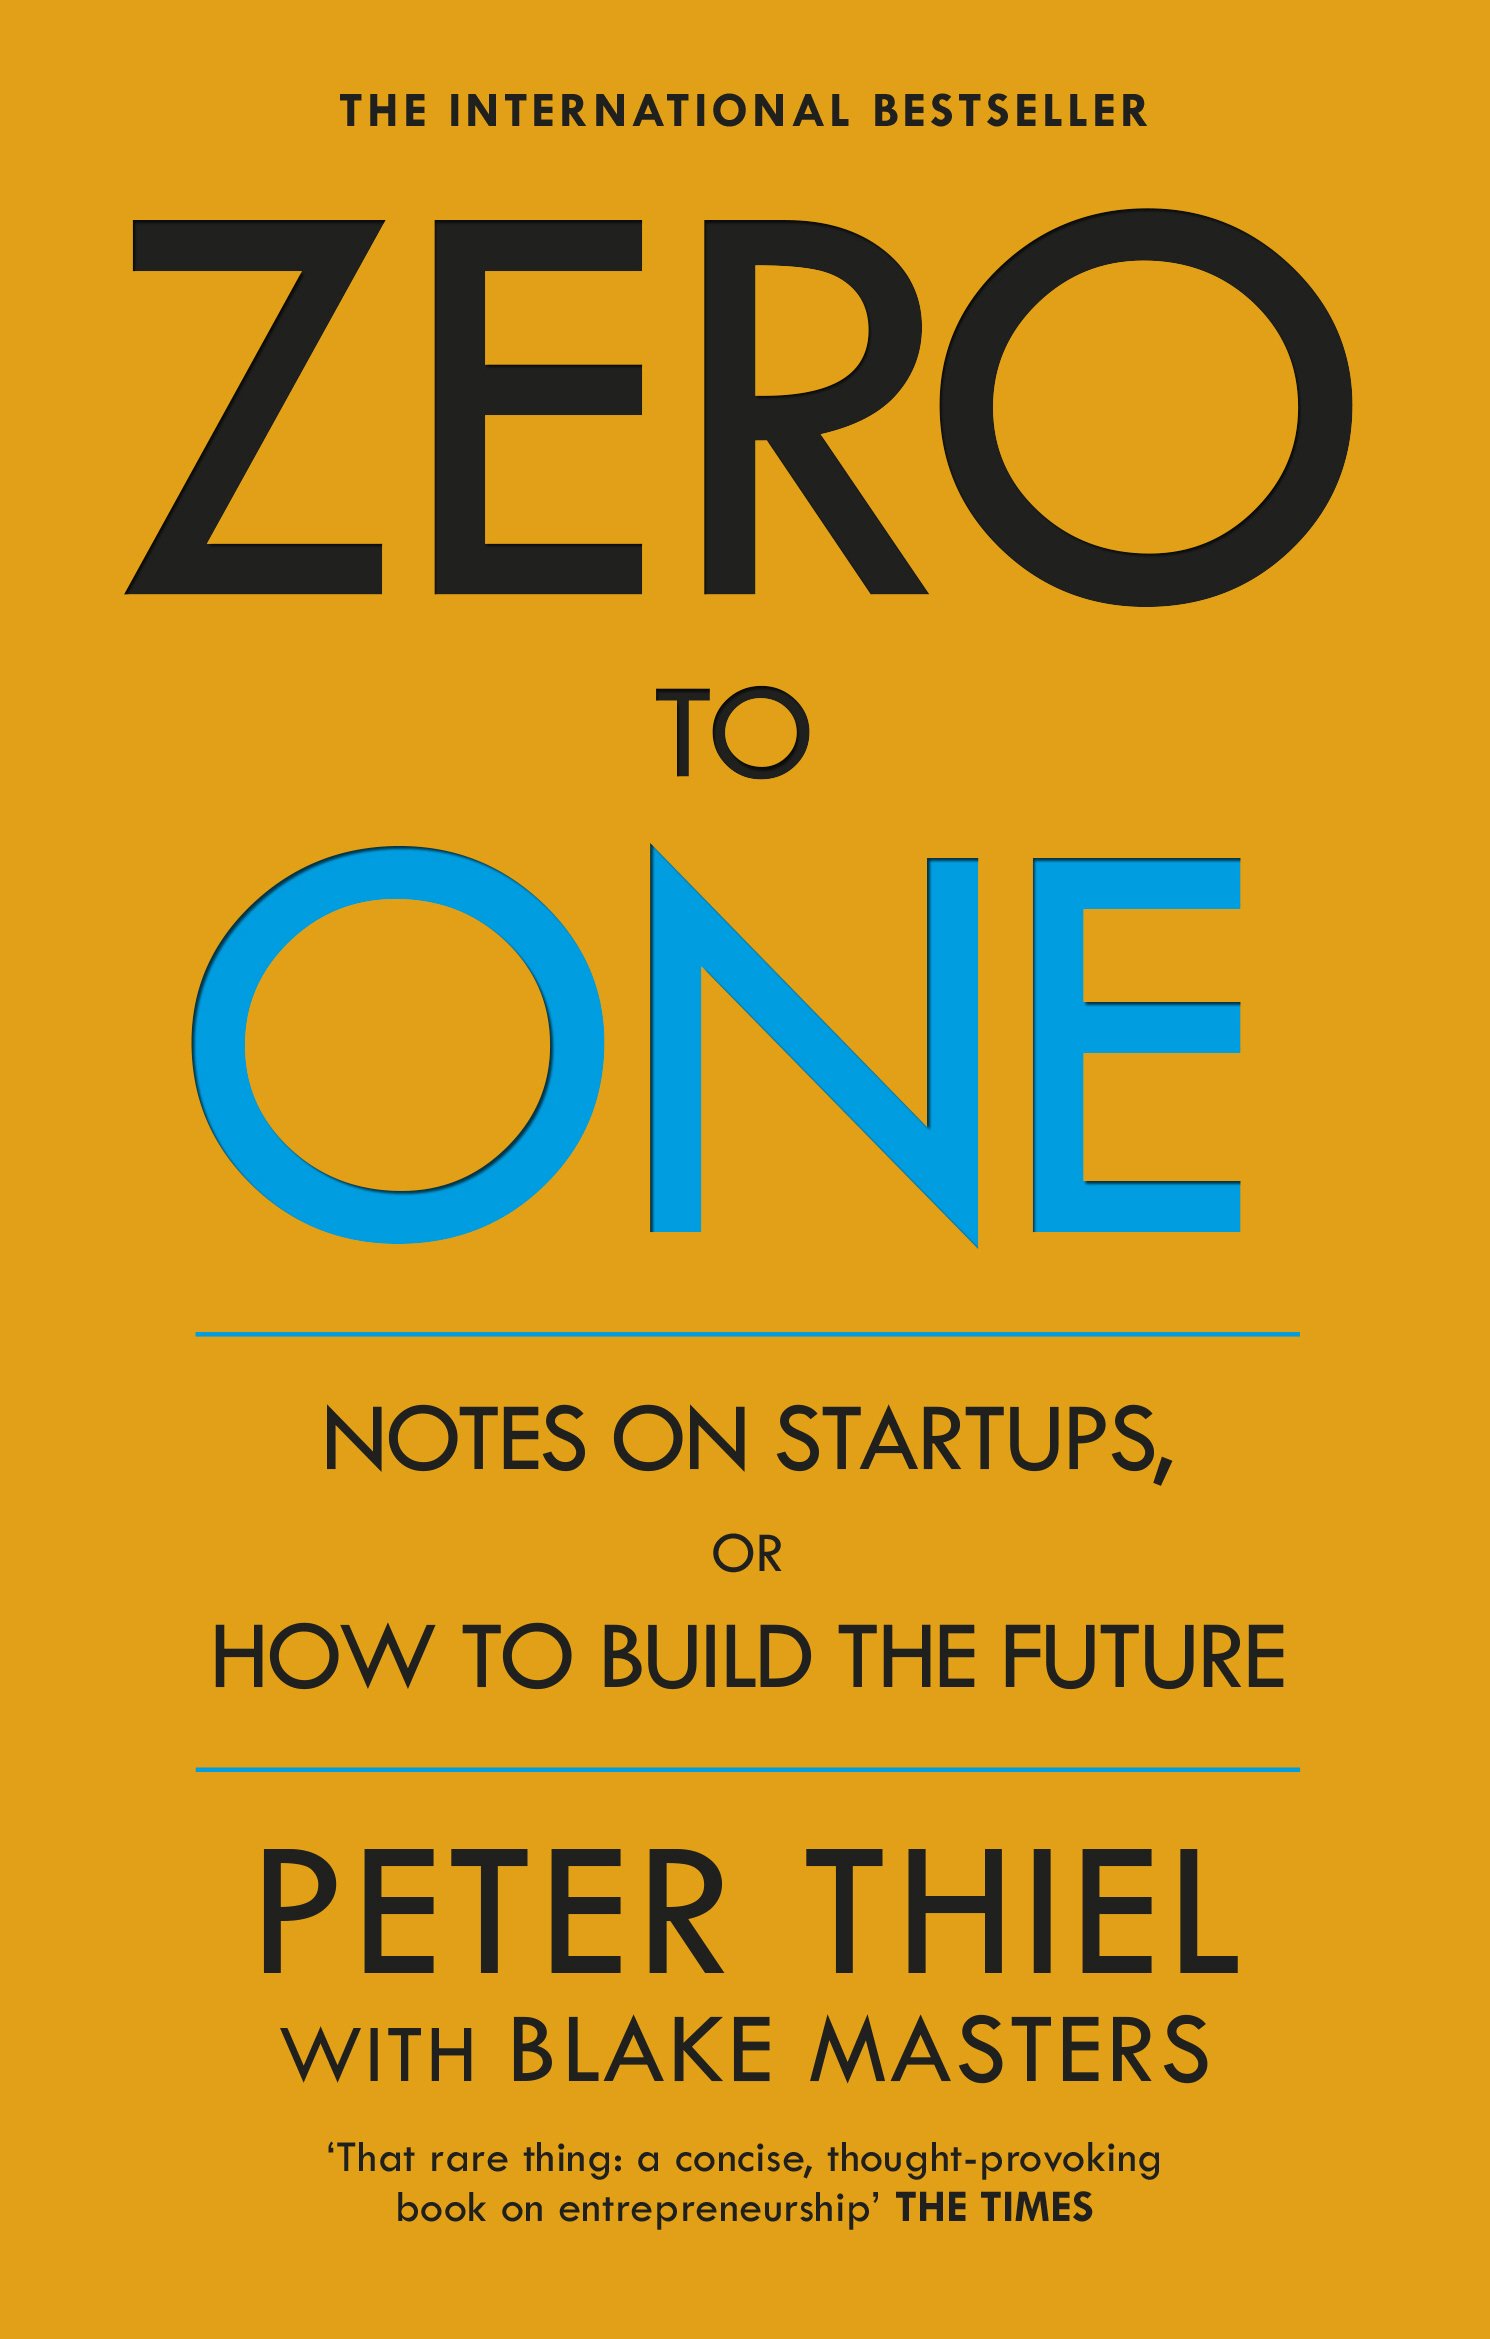 Zero to one by Peter Thiel